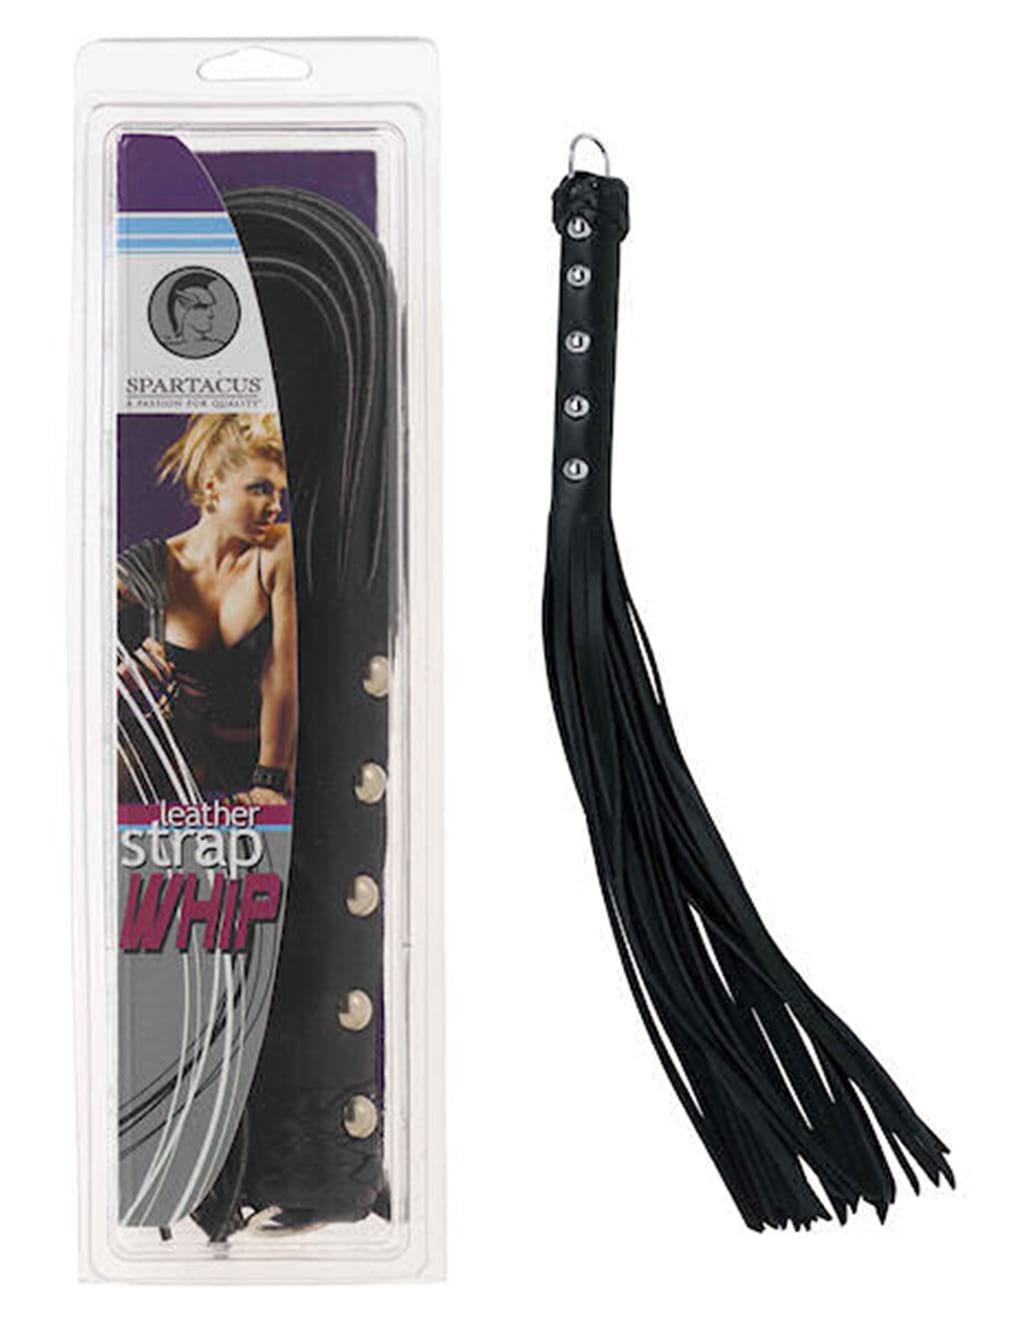 Spartacus Leather Strap Whip 20"